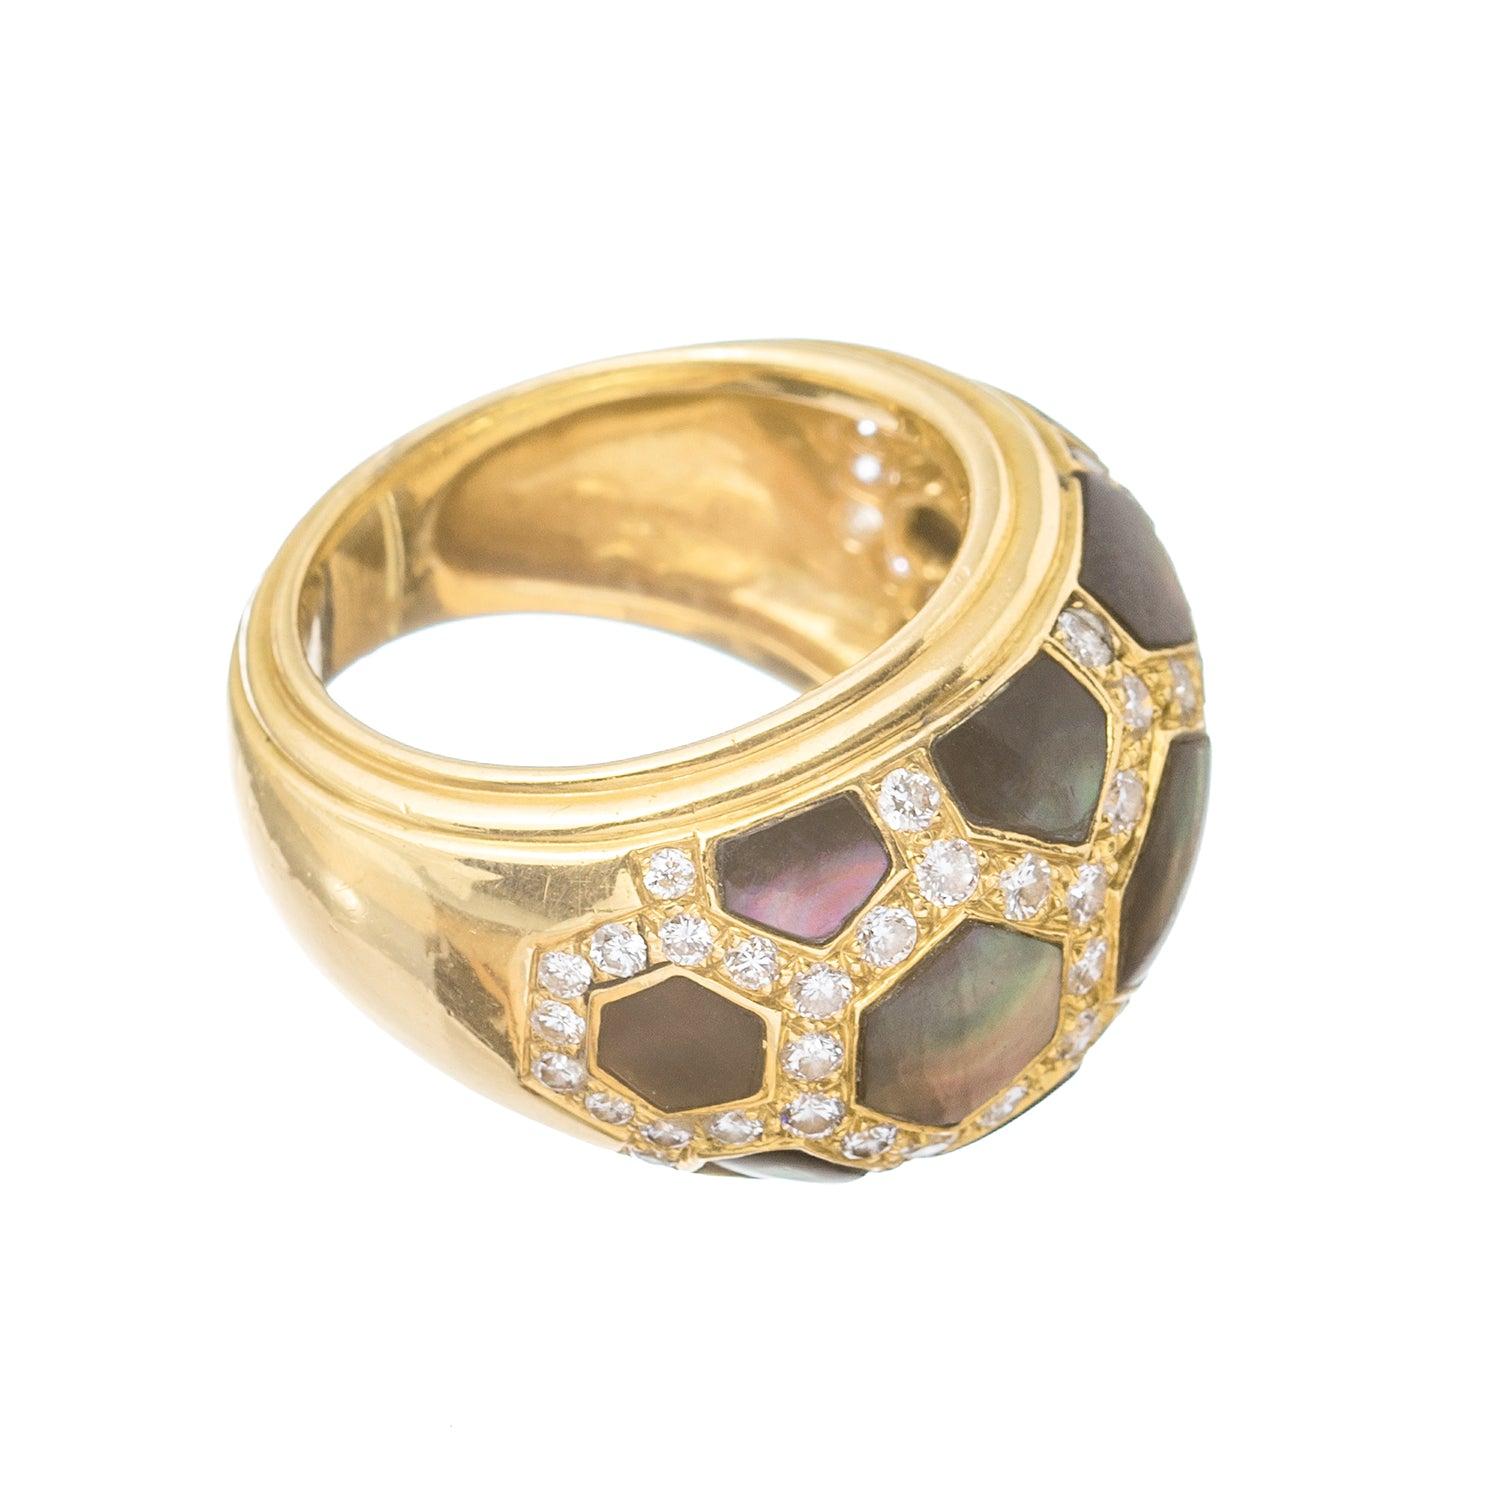 This exquisite Van Cleef & Arpels 18 karat gold domed band ring showcases a unique honeycomb pattern, adorned with stunning inset abalone, and framed by round brilliant-cut diamonds.

With its signature 